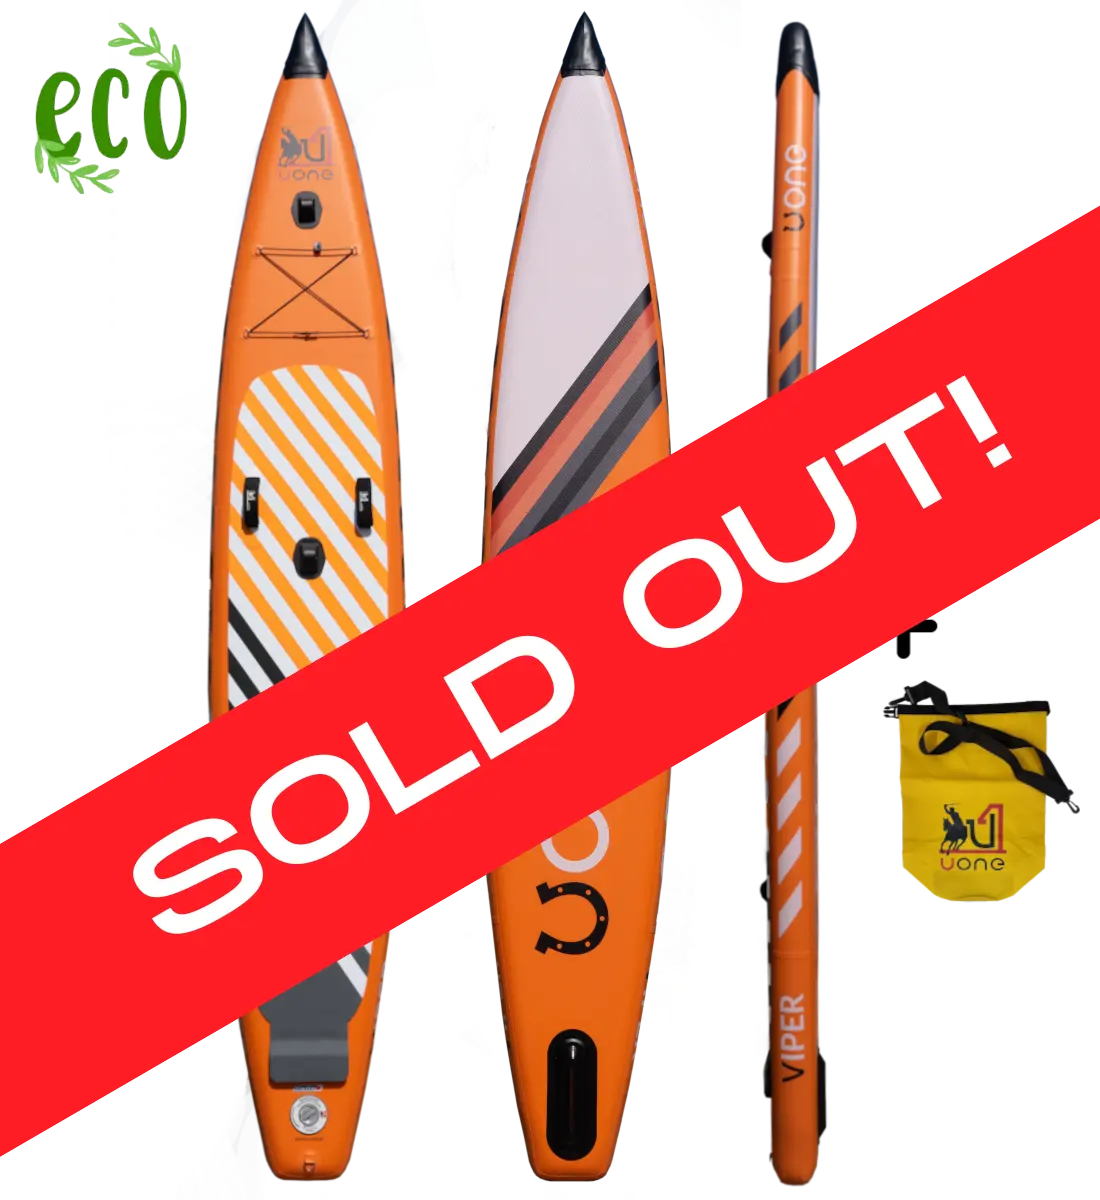 viper sold out